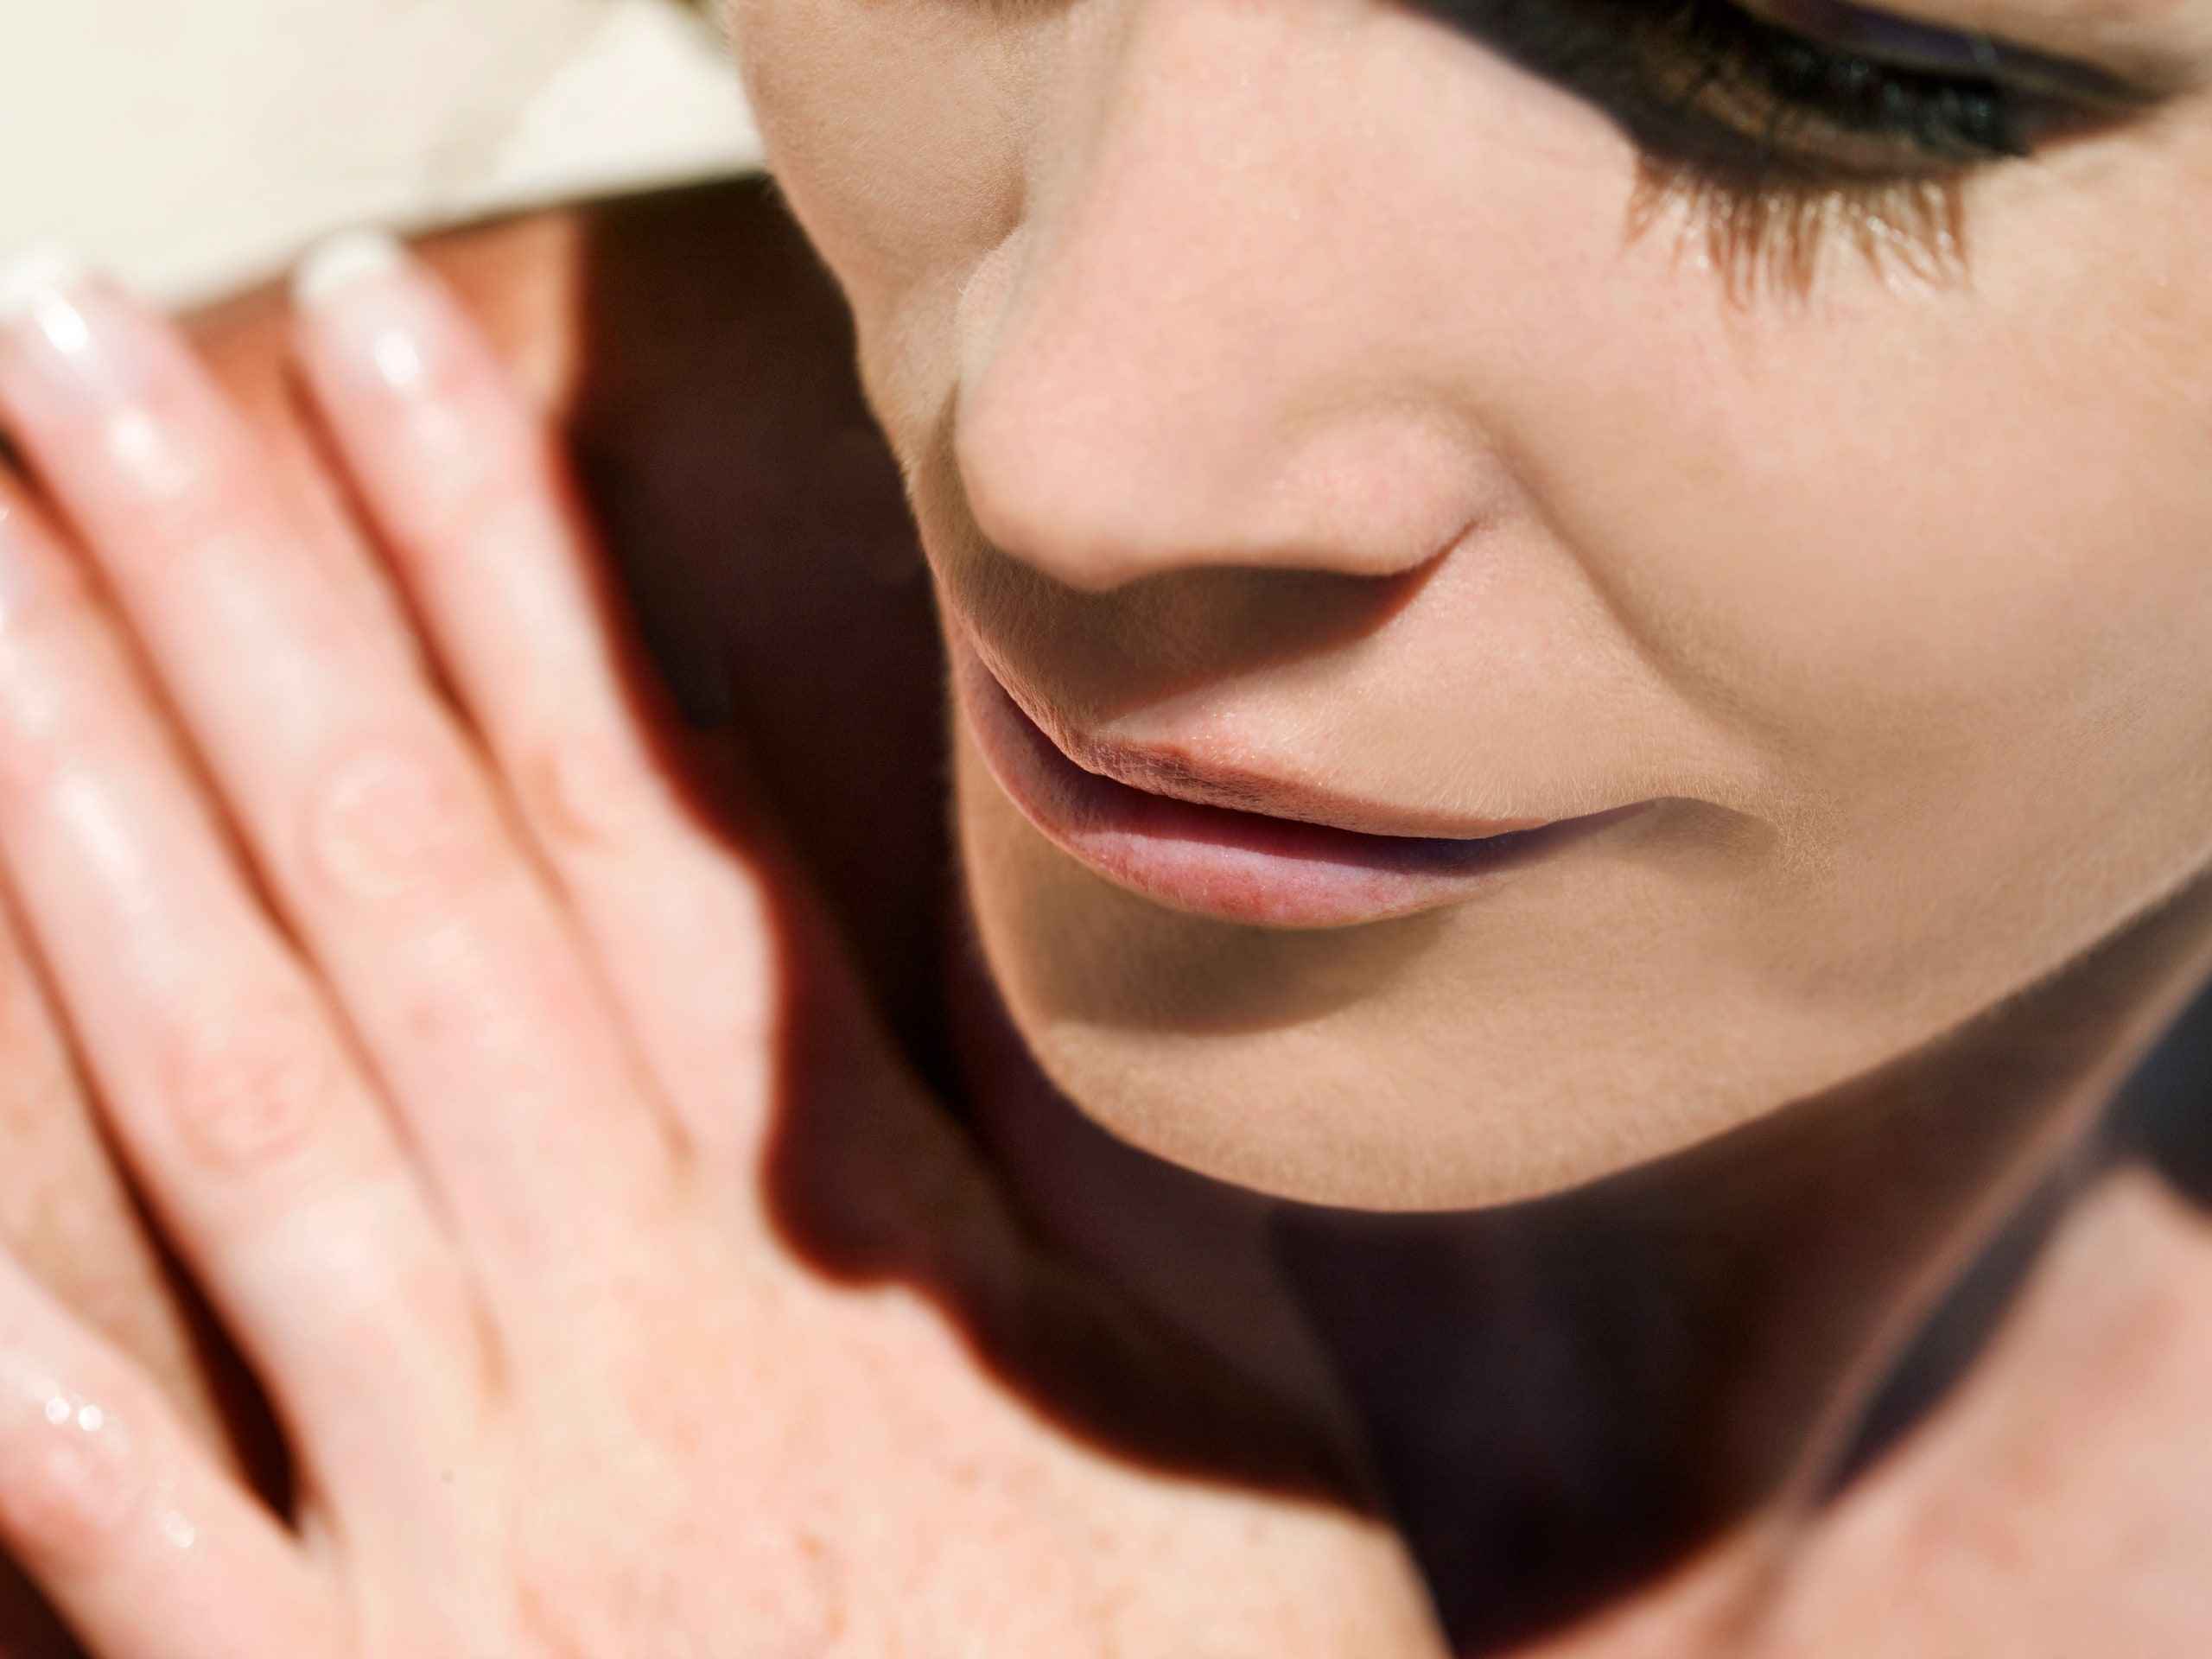 6 Ingredients to Watch Out for if You Have Sensitive Skin